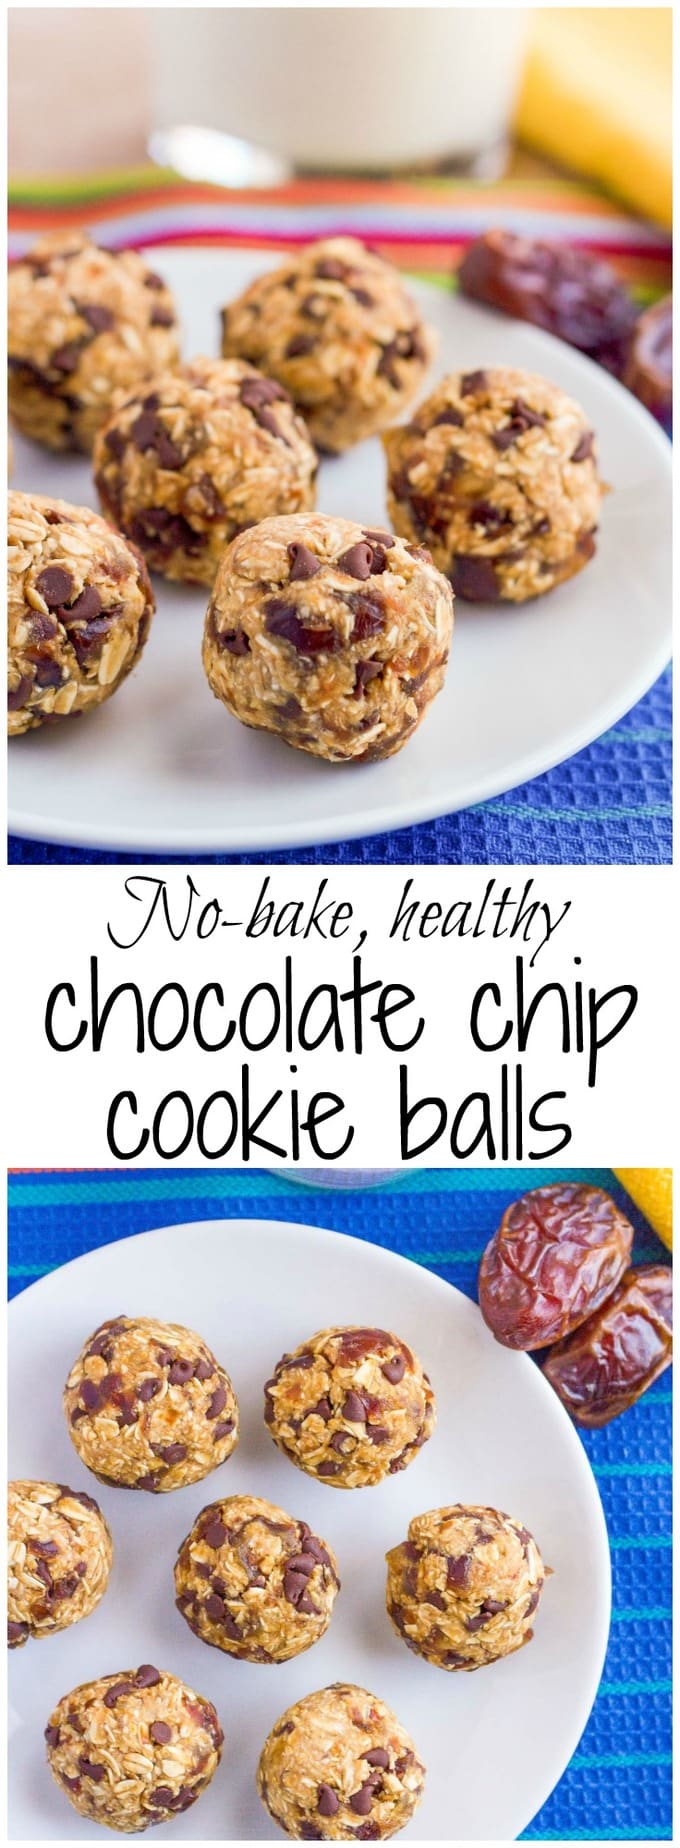 Photo collage of chocolate chip cookie balls with a text box in the middle